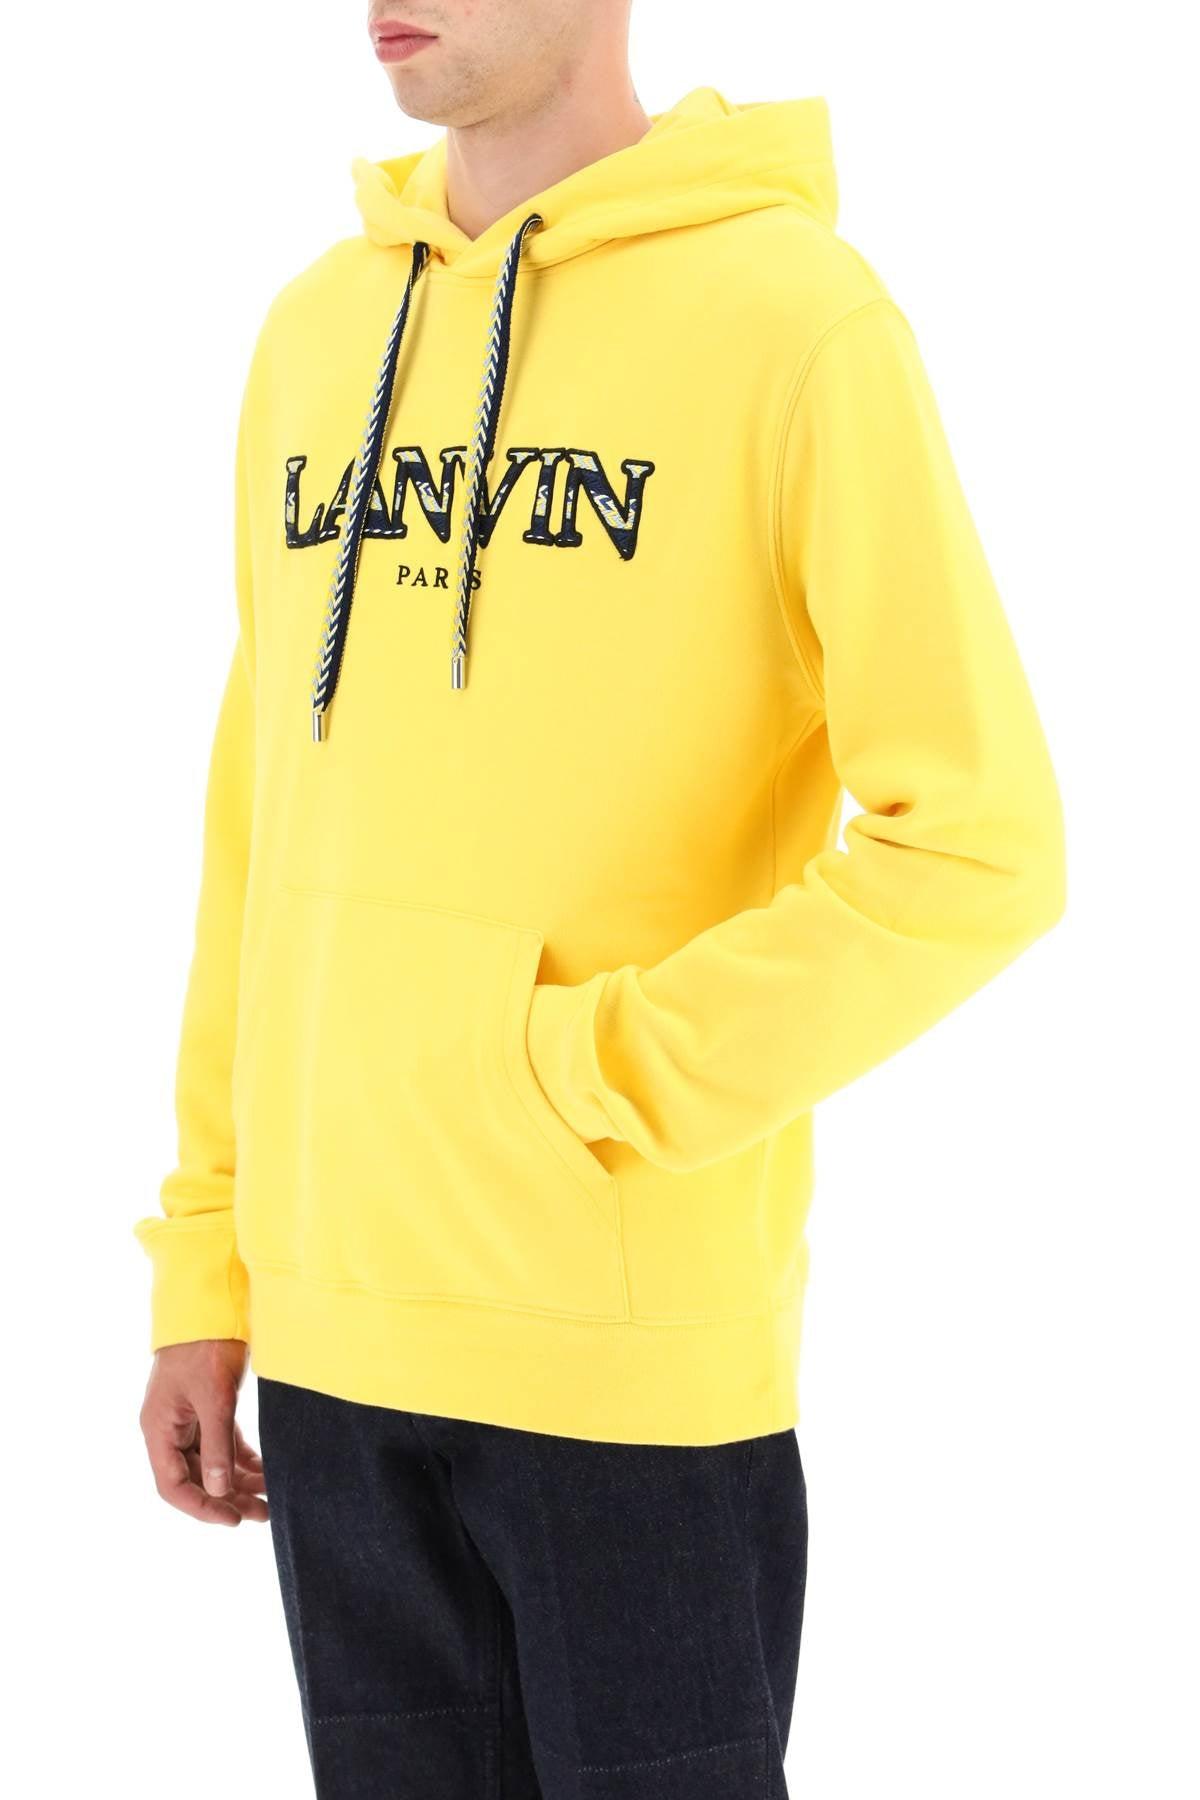 Lanvin 'curb' Logo Hoodie in Yellow for Men | Lyst